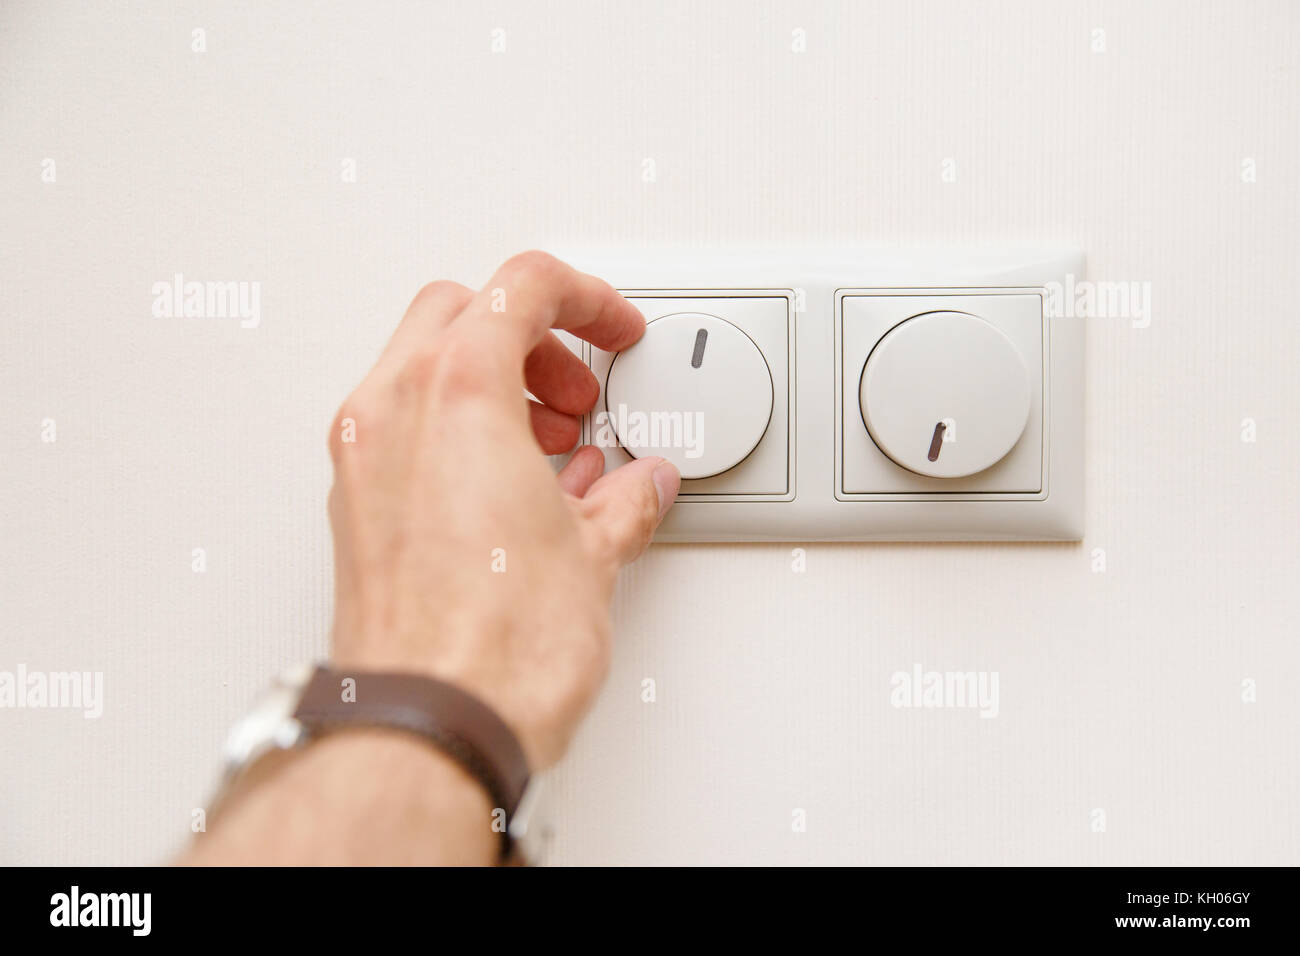 Saving energy concept: Human hand turning down electrical light dimmer switch or conditioner heat controller Stock Photo